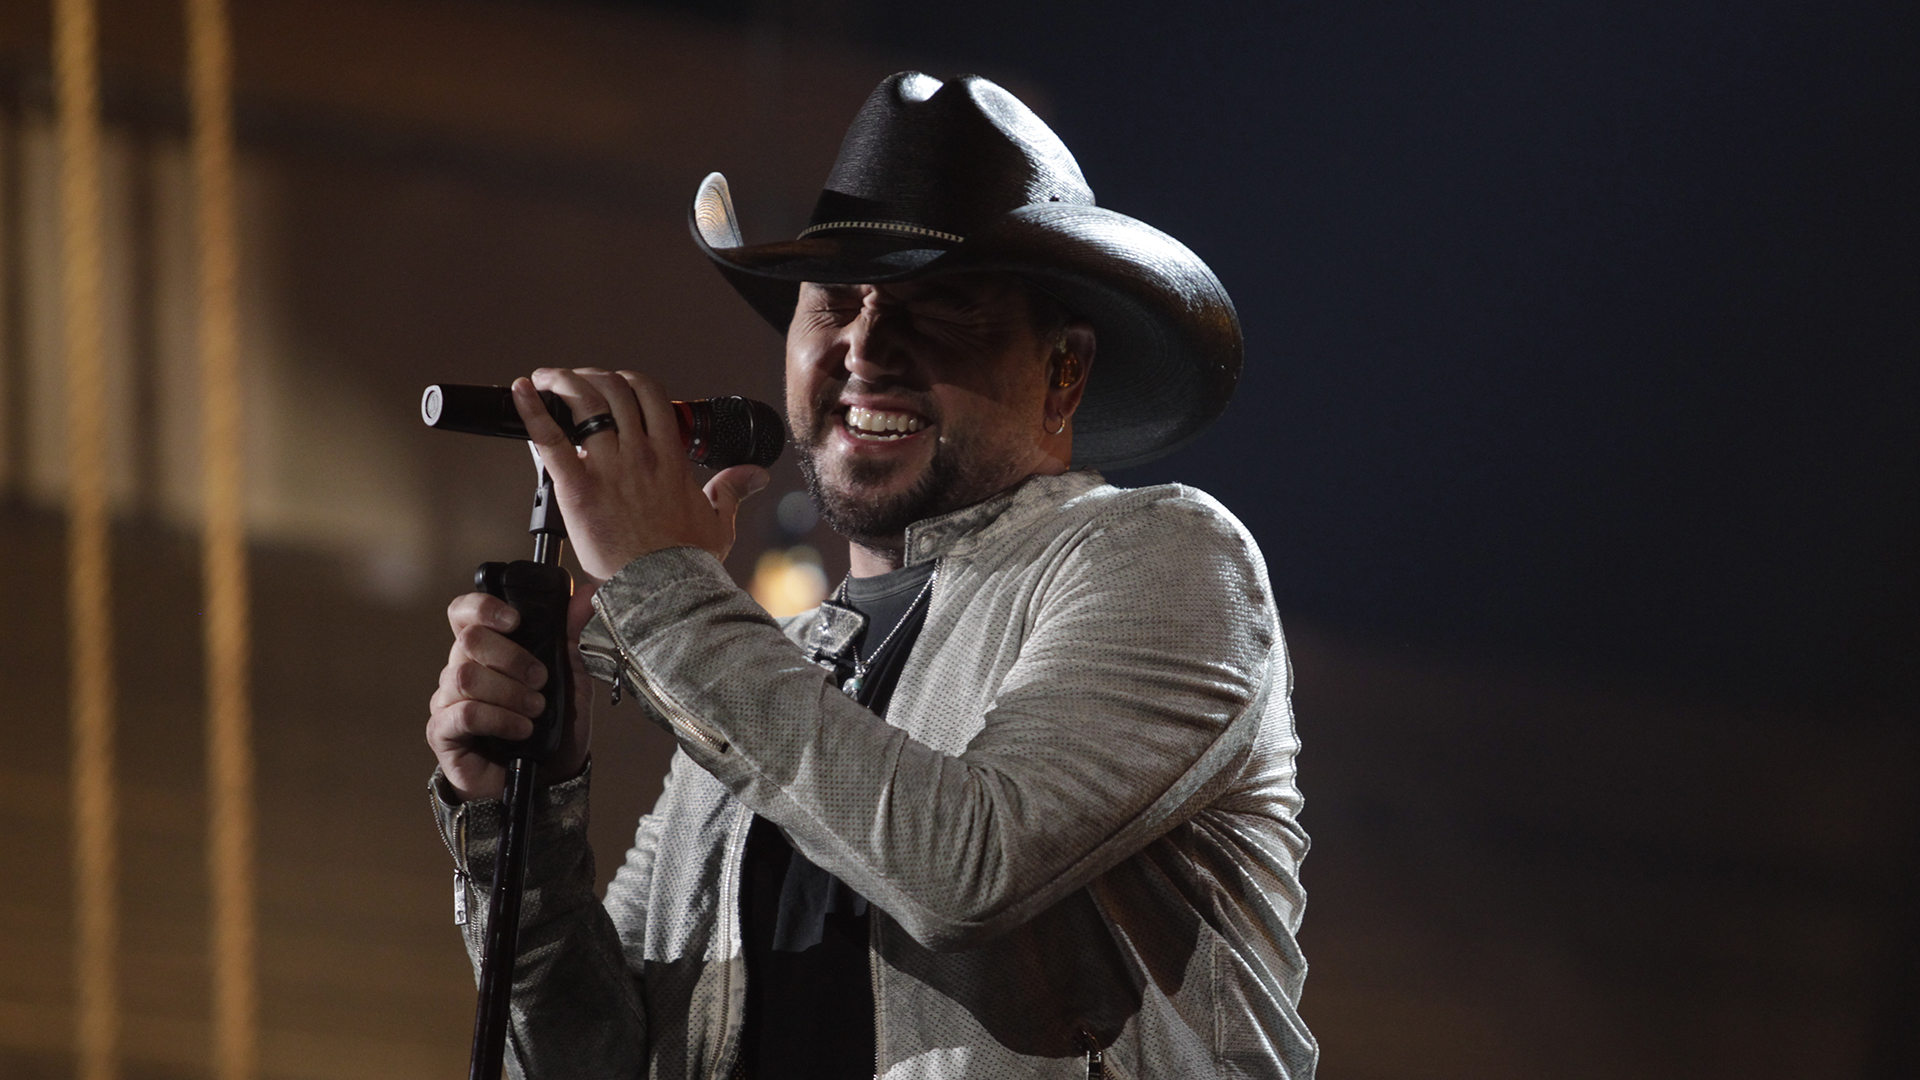 Jason Aldean makes it easy for the audience to enjoy 